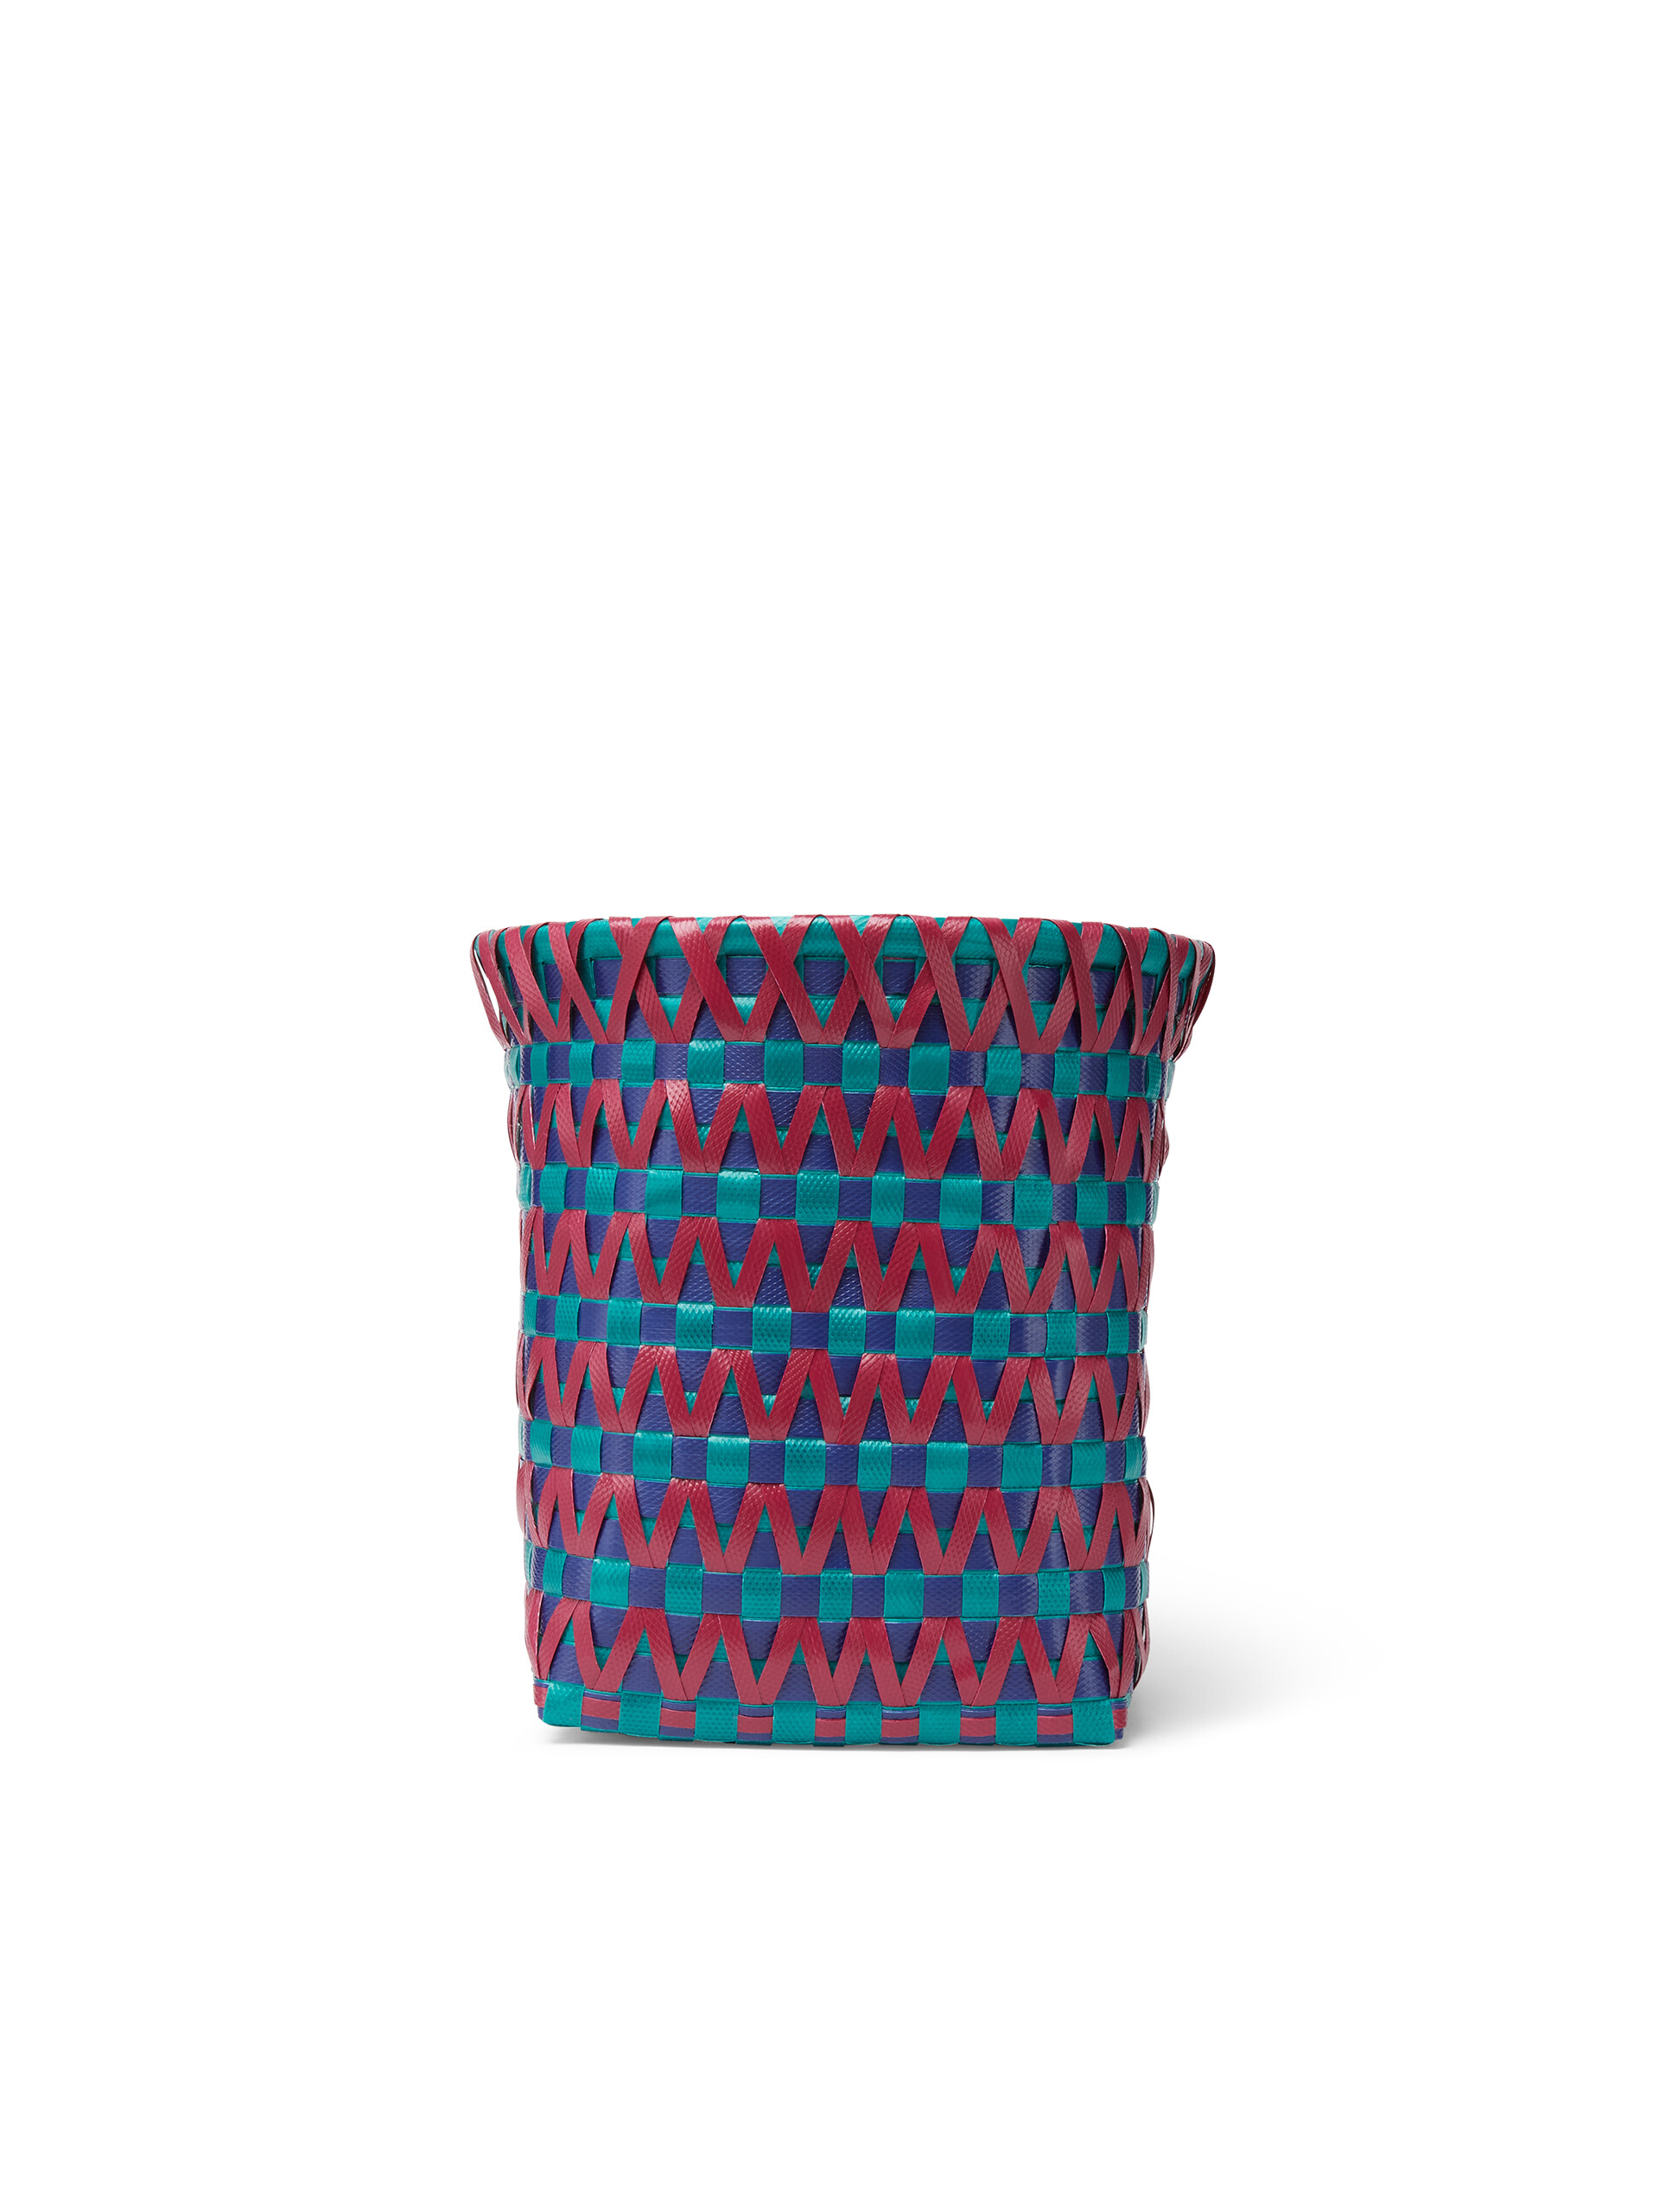 MARNI MARKET basket in pale blue blue and burgundy woven PVC - Home Accessories - Image 3